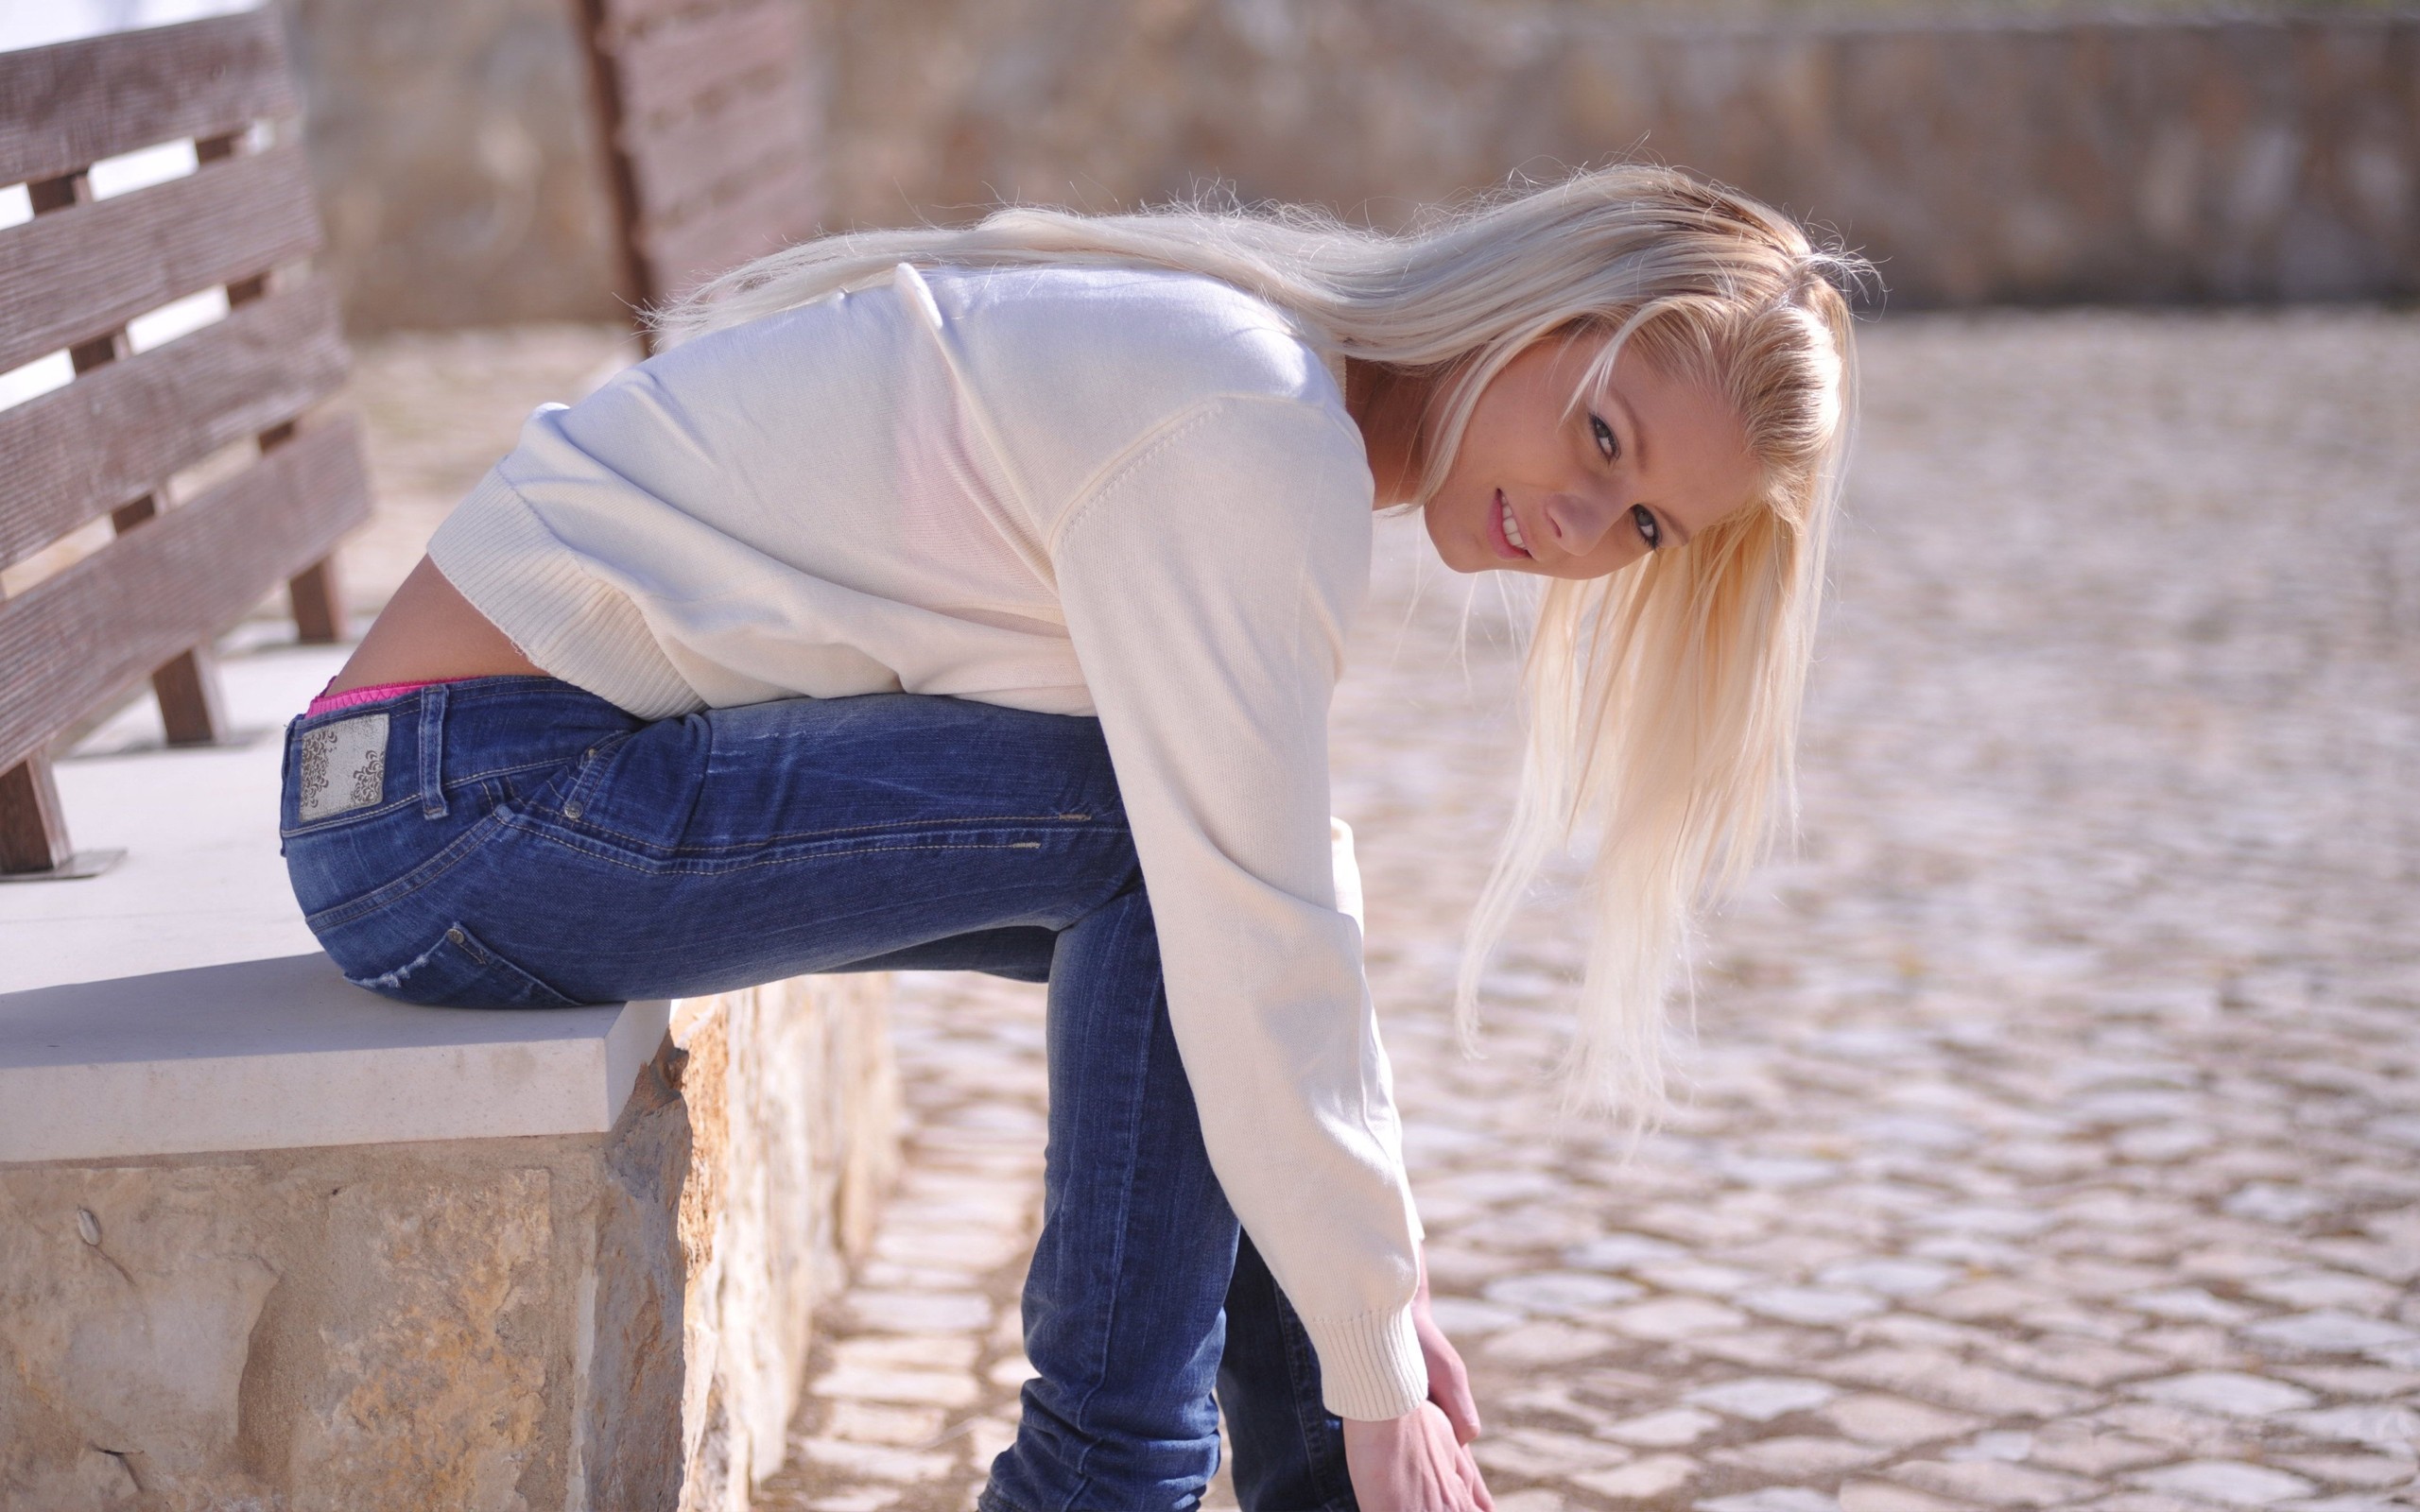 carol hani add bent over in jeans photo